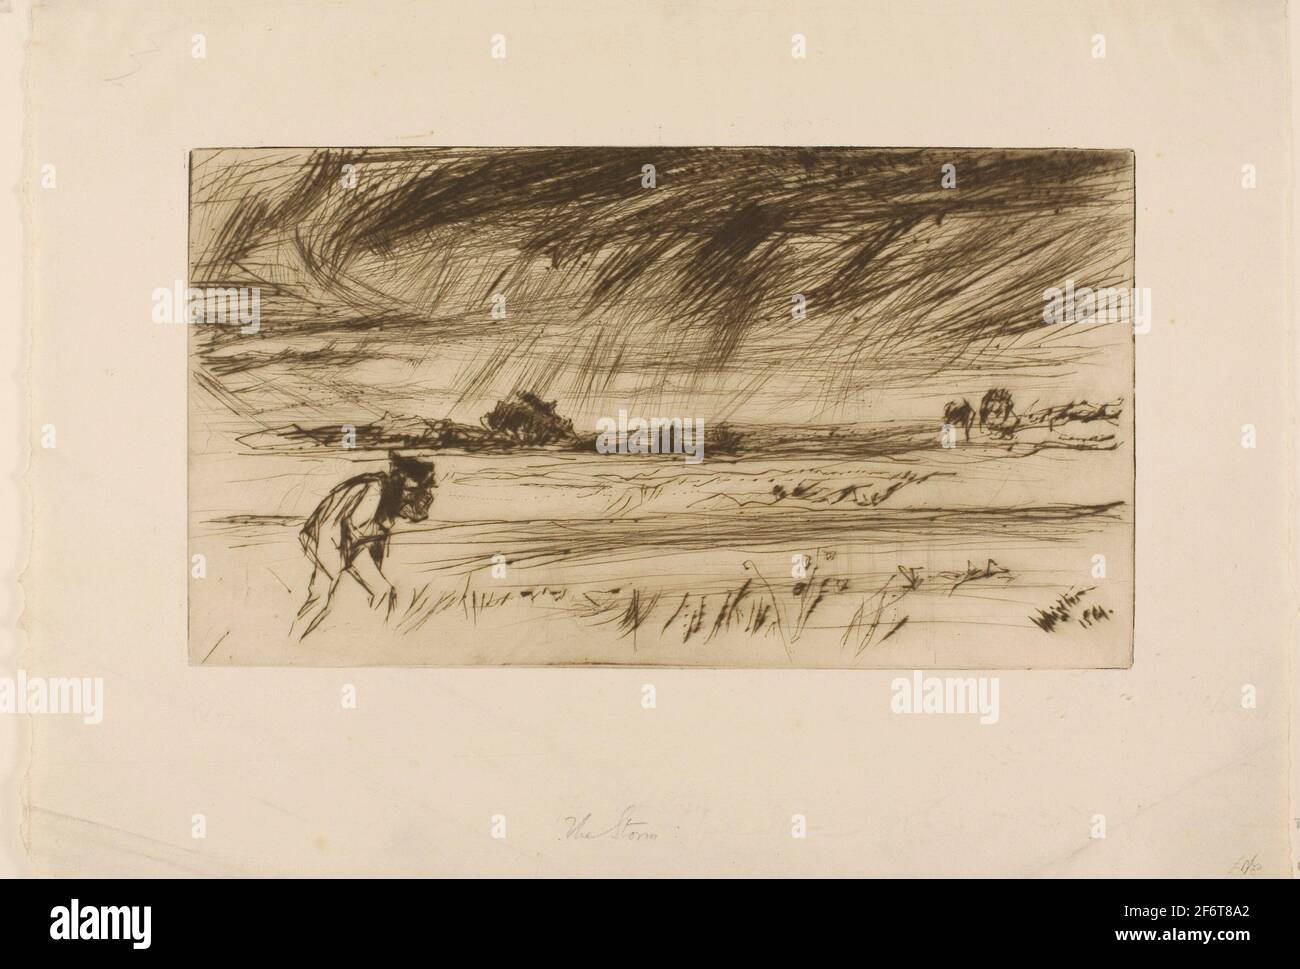 Author: James McNeill Whistler. The Storm - 1861 - James McNeill Whistler American, 1834-1903. Drypoint in dark brown ink on ivory laid paper. United Stock Photo